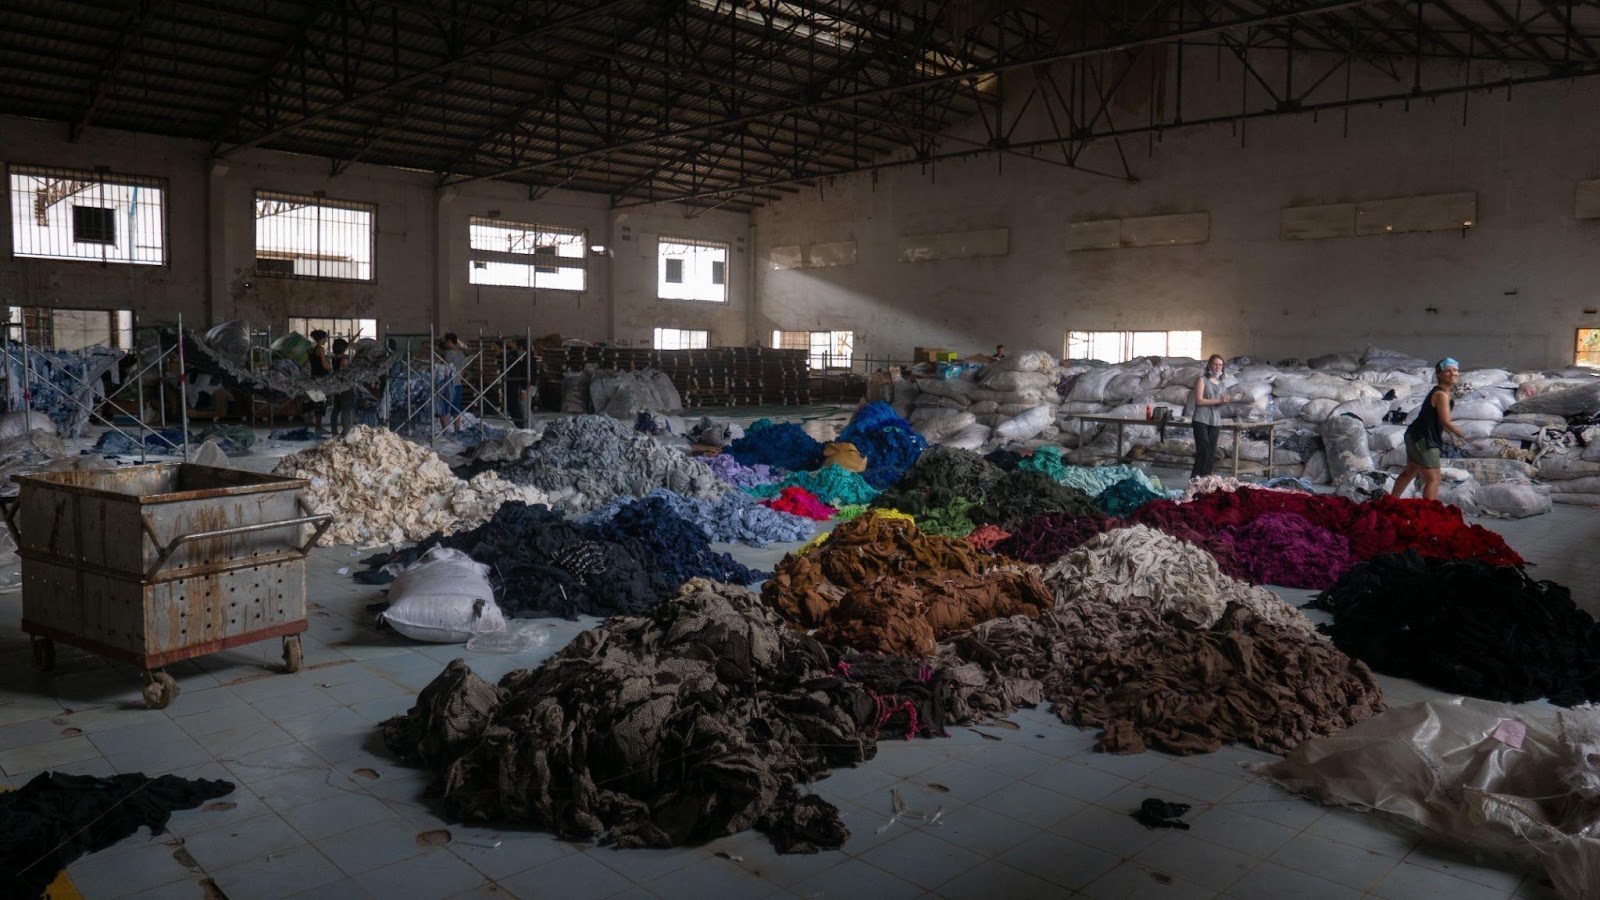 A picture of what unseen, unsustainable fast fashion looks like. Designers like Ann Dishinger Chicago are moving towards slow fashion sighting numberable benefits